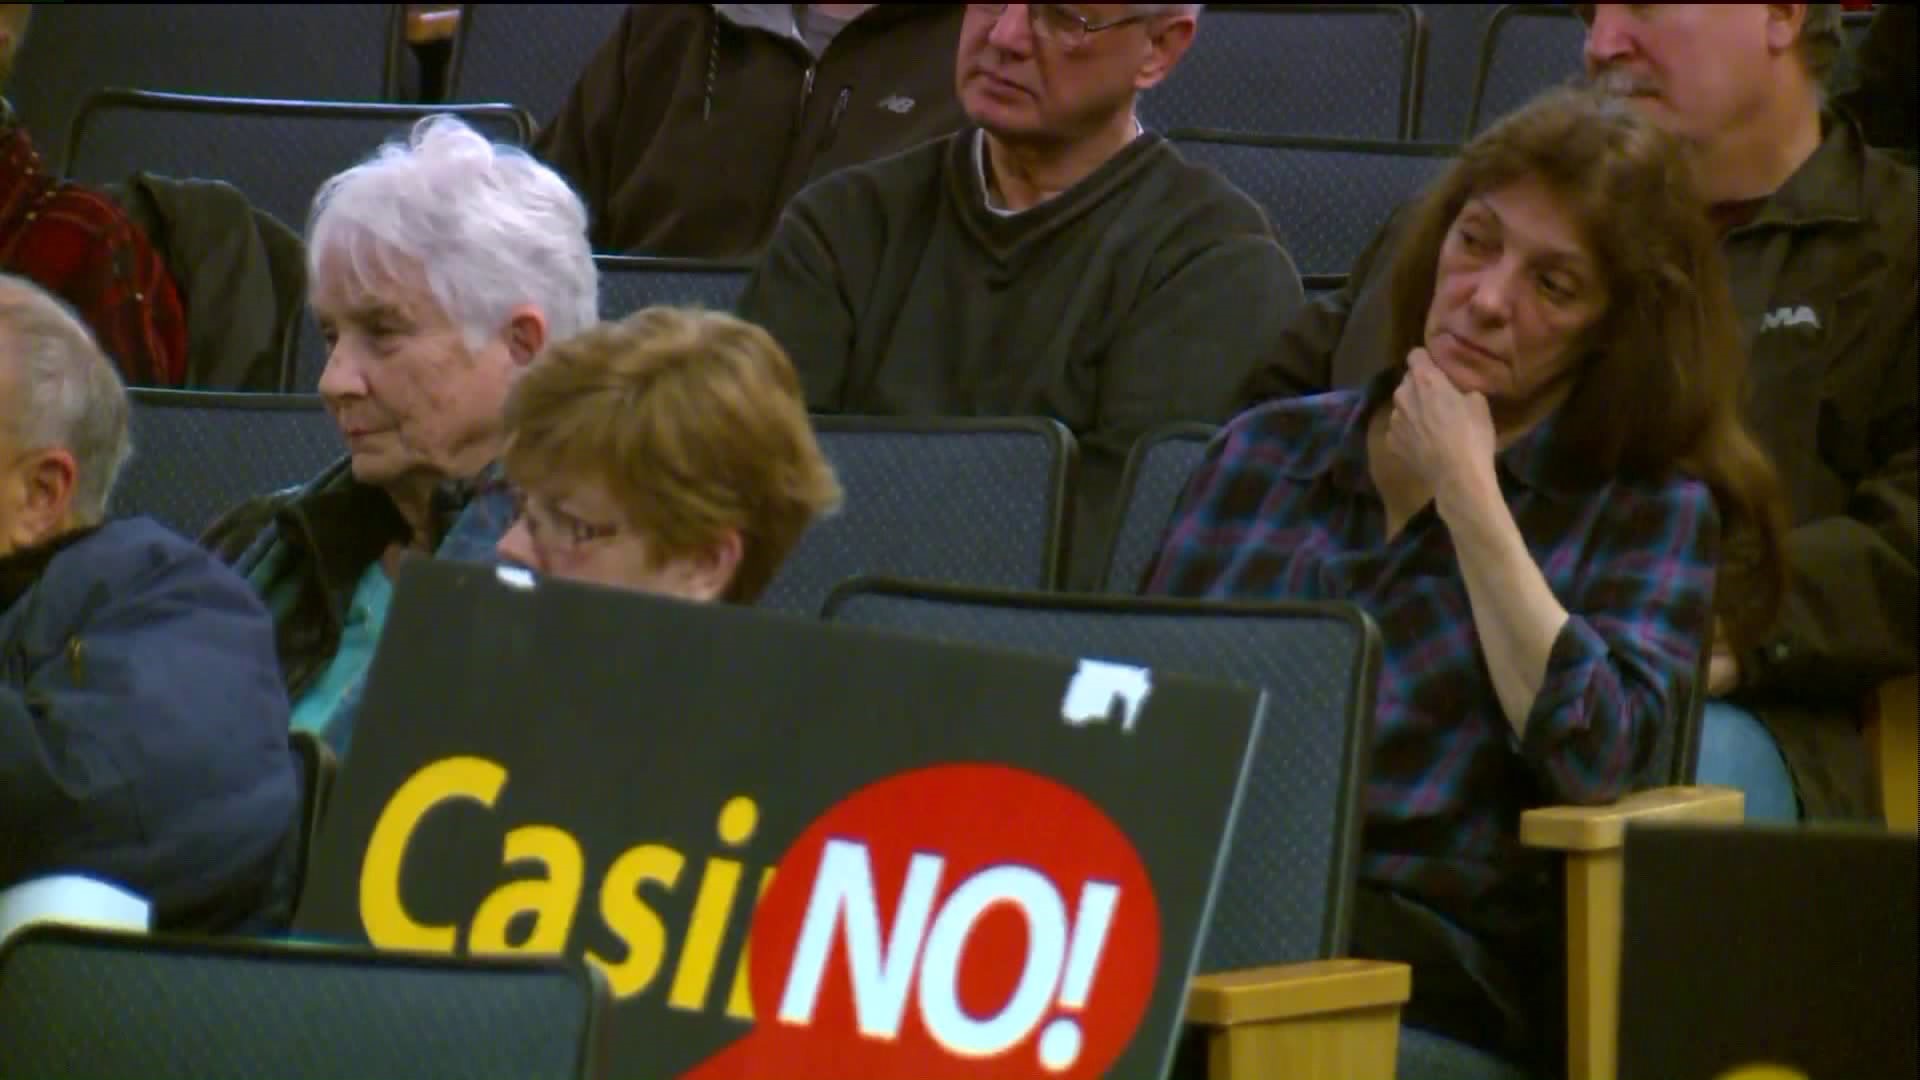 East Windsor residents meet on plans to oppose casino